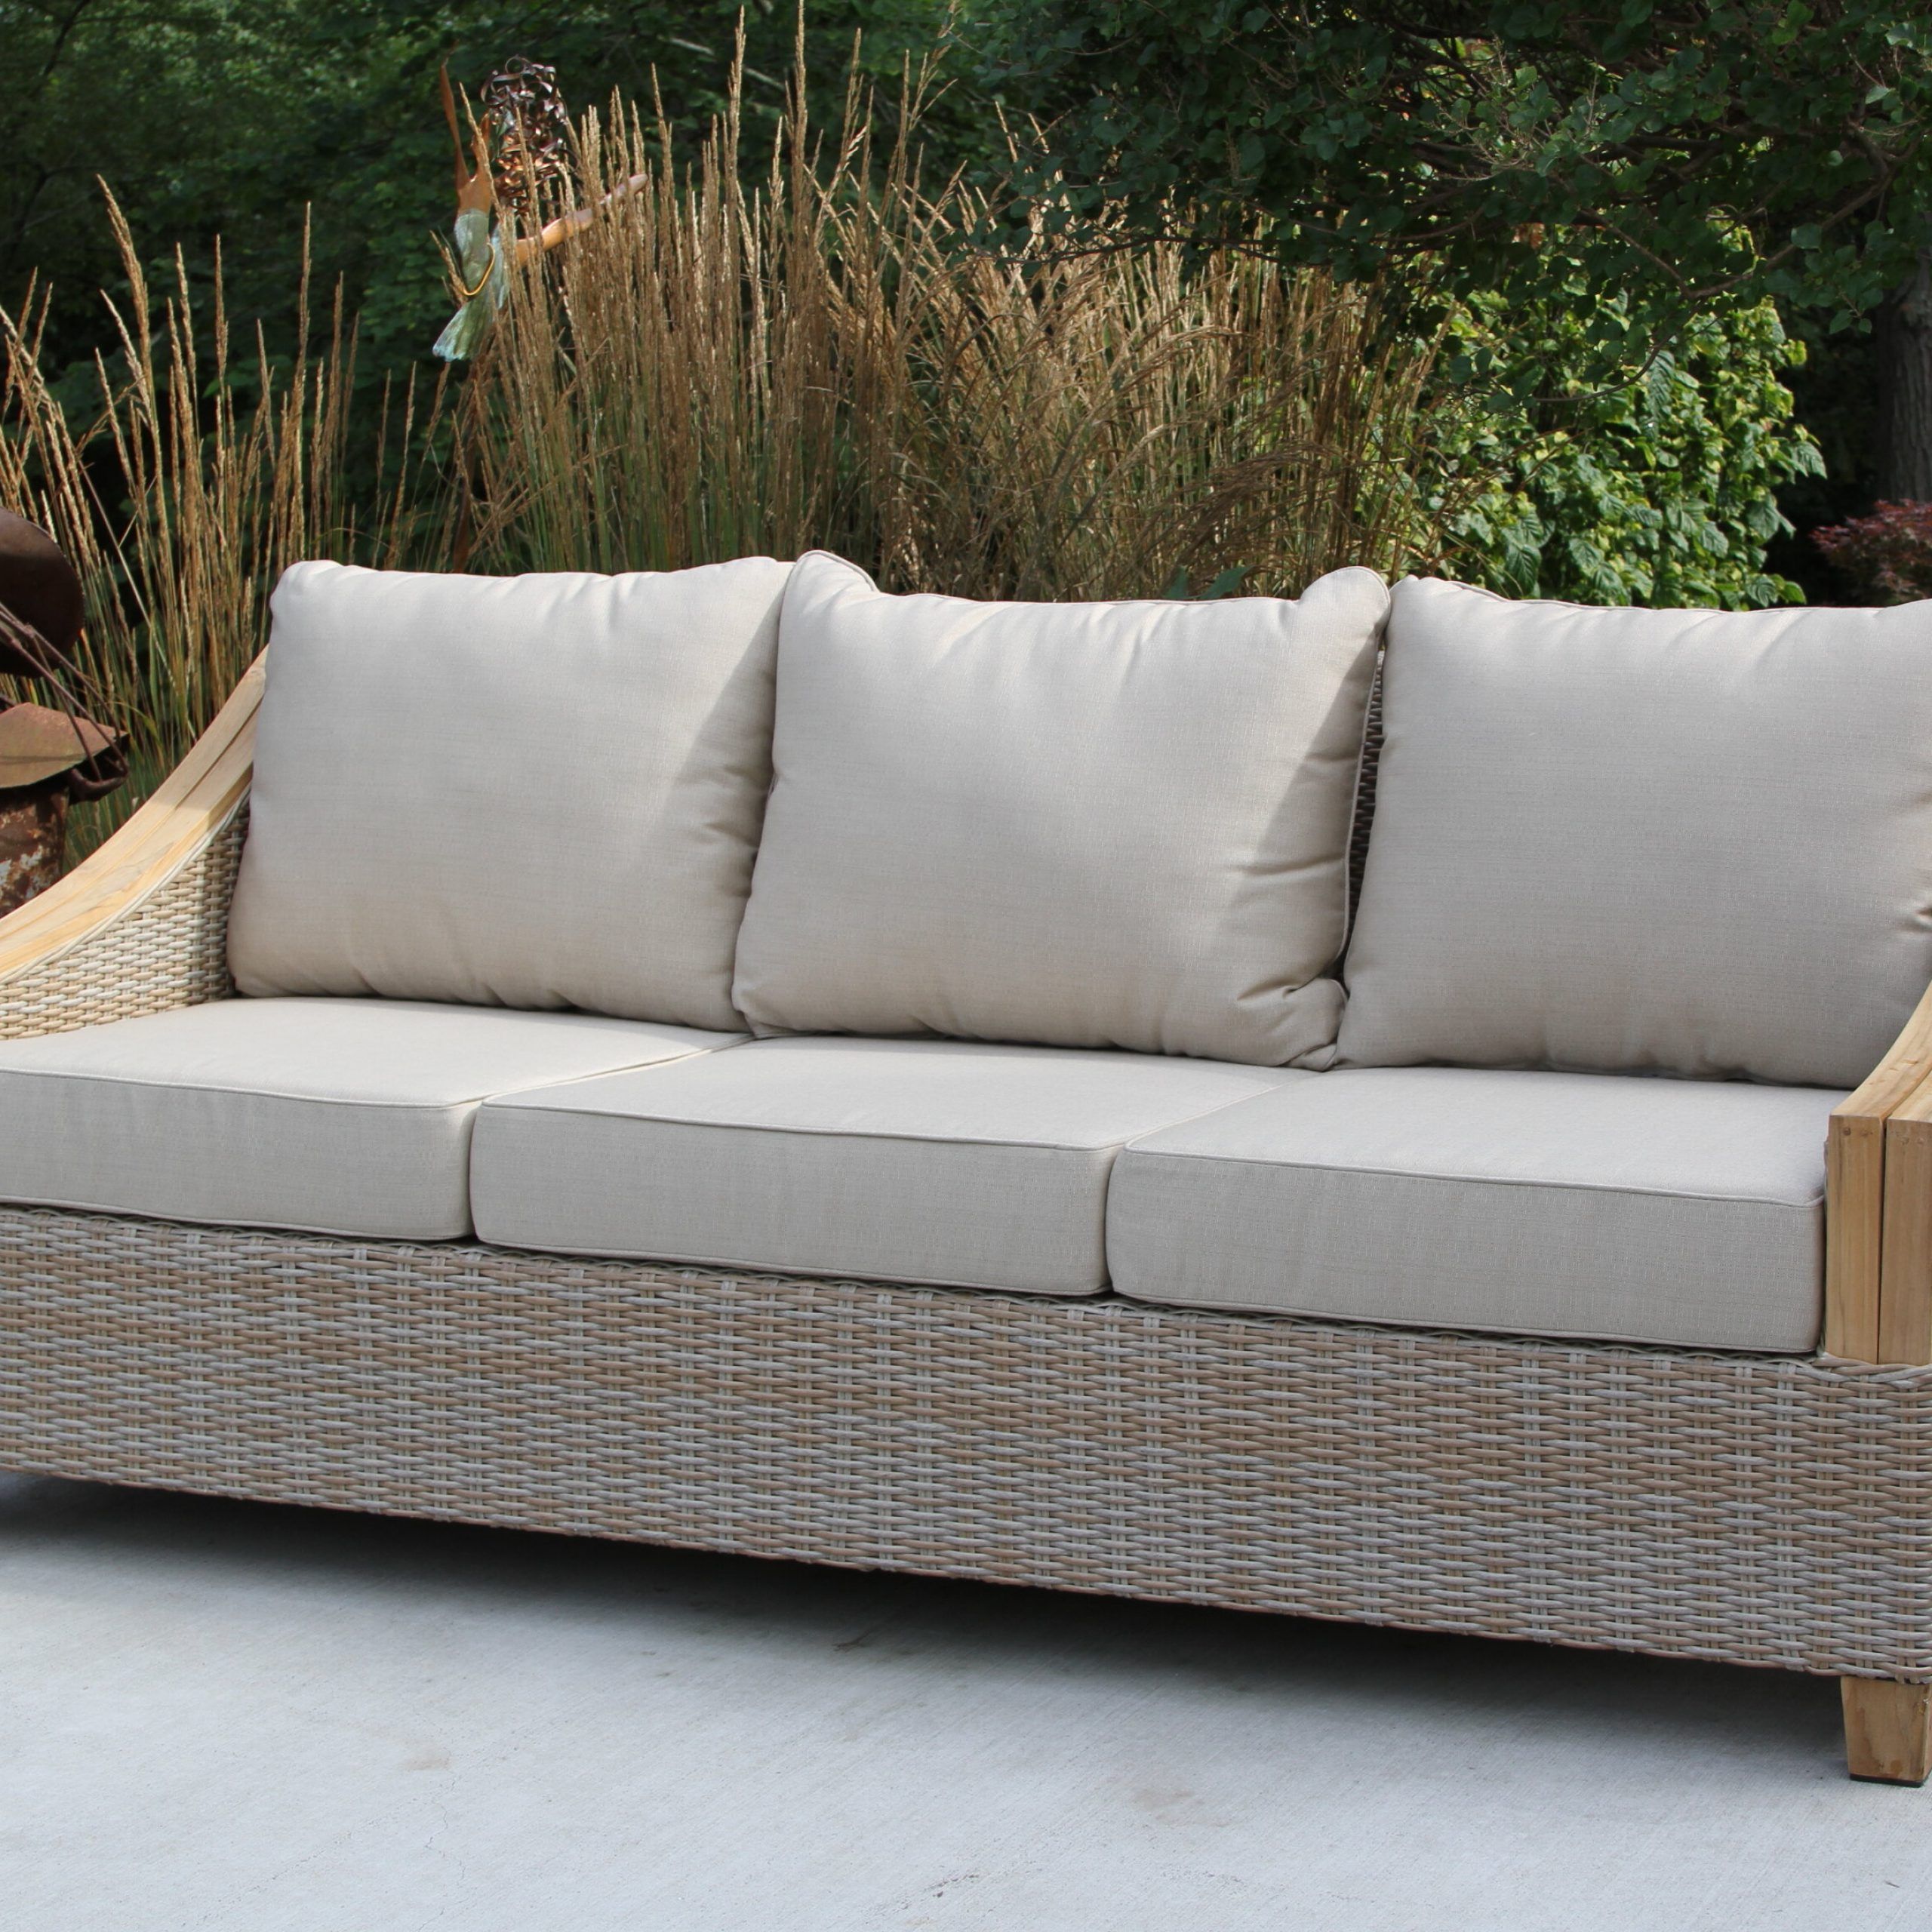 Most Recent Lawson Patio Sofas With Cushions Inside Kincaid Teak Patio Sofa With Sunbrella Cushions (View 15 of 25)